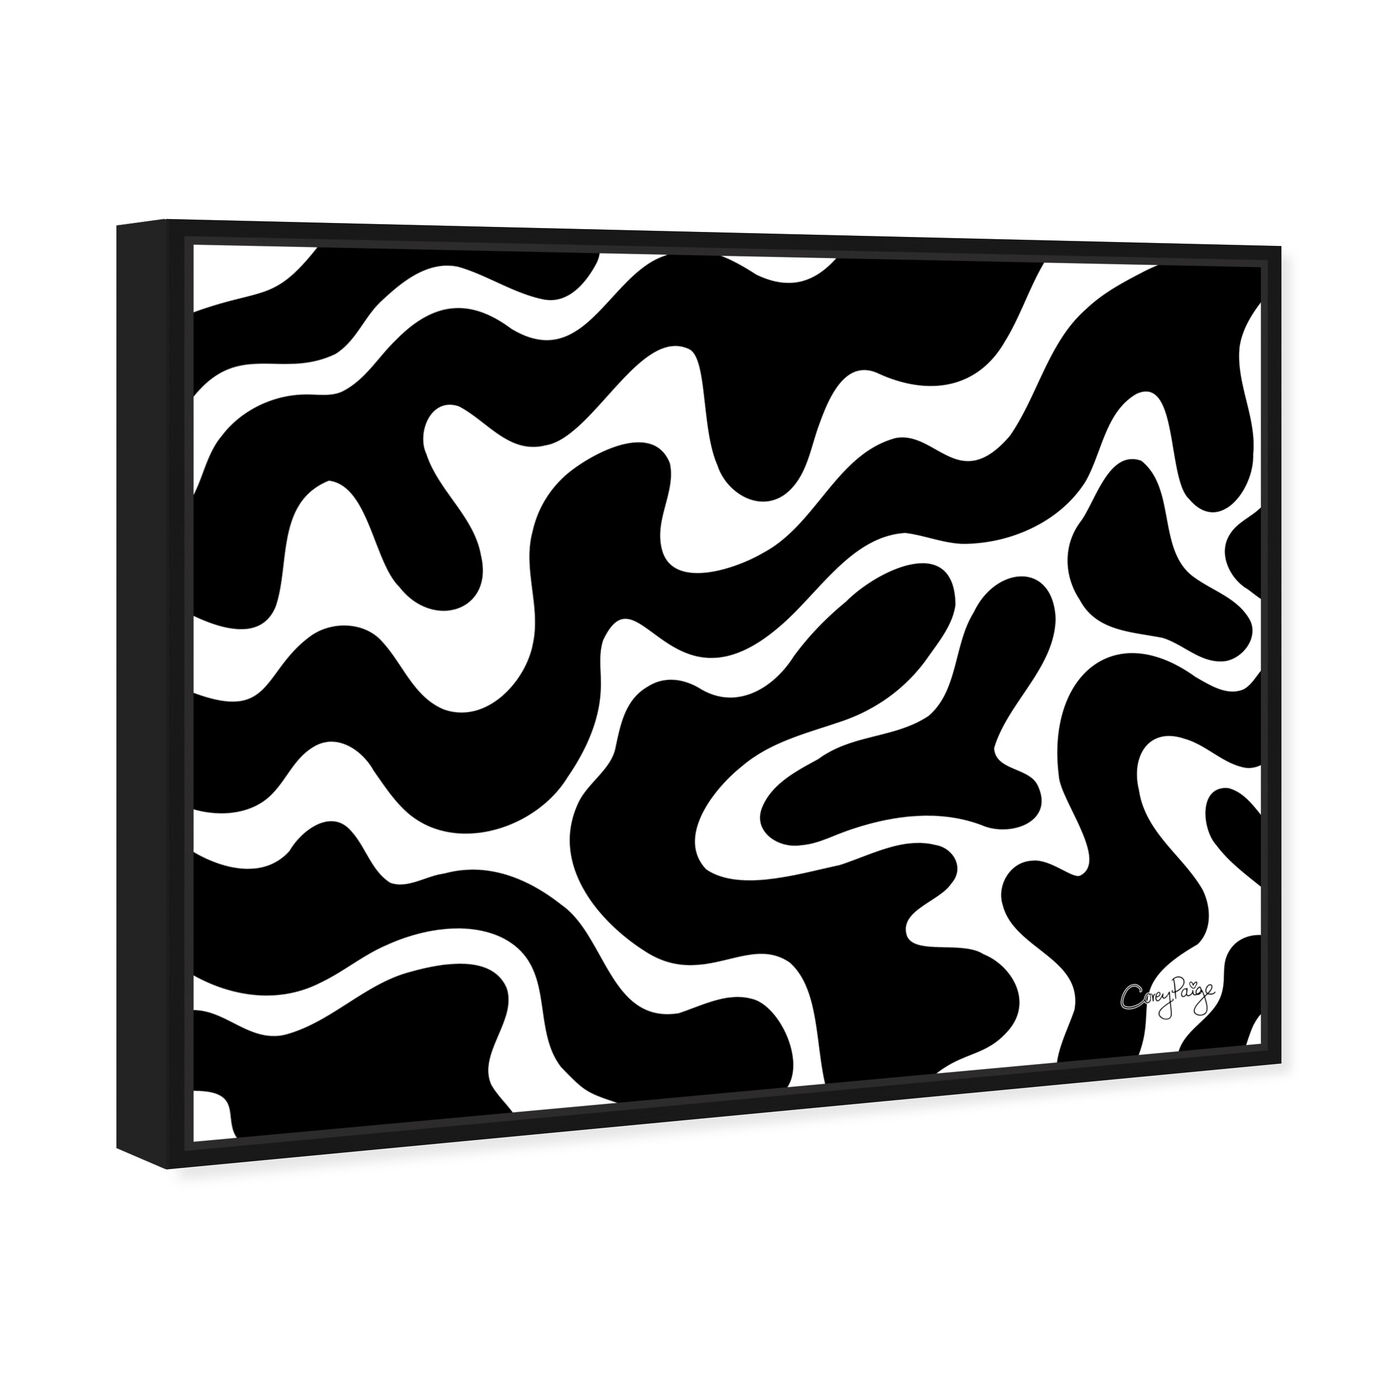 Angled view of Corey Paige - Black & White Abstract featuring abstract and shapes art.